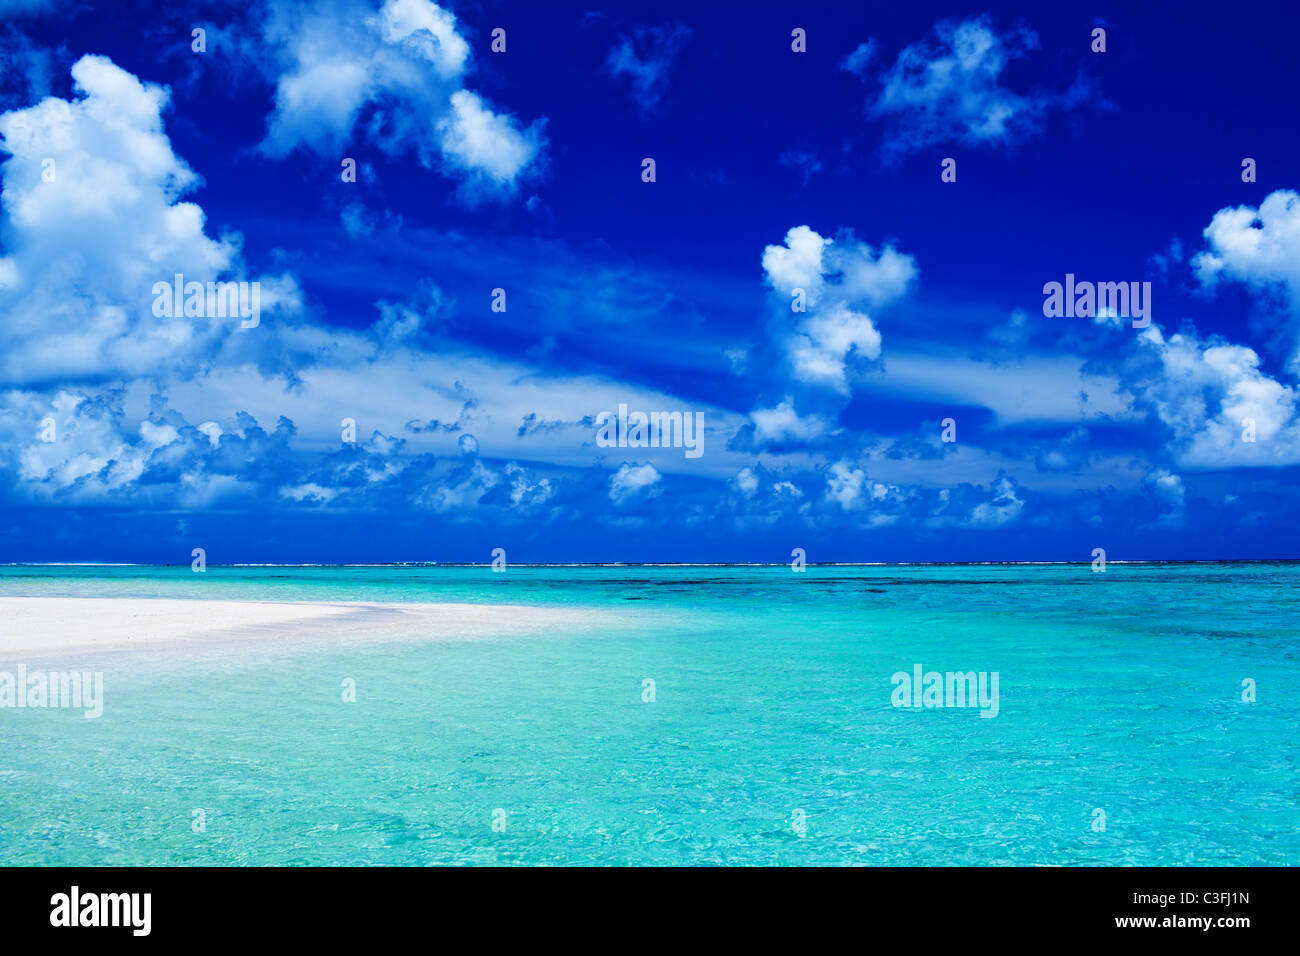 Empty beach with blue sky and vibrant ocean colors Stock Photo